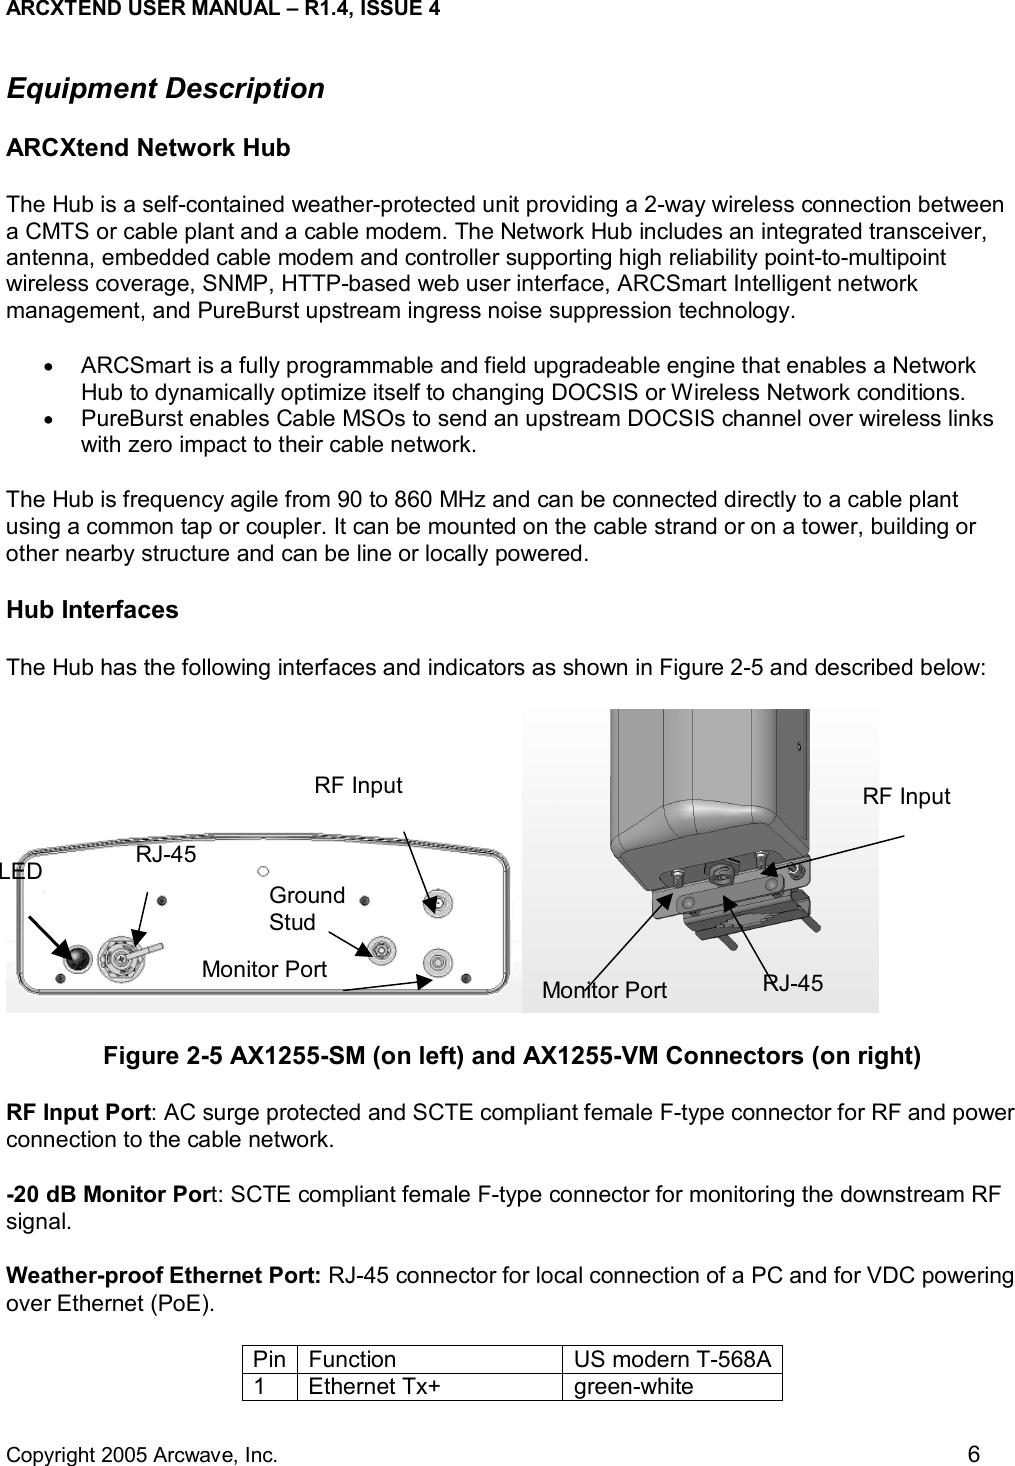 ARCXTEND USER MANUAL – R1.4, ISSUE 4  Copyright 2005 Arcwave, Inc.    6 Equipment Description ARCXtend Network Hub The Hub is a self-contained weather-protected unit providing a 2-way wireless connection between a CMTS or cable plant and a cable modem. The Network Hub includes an integrated transceiver, antenna, embedded cable modem and controller supporting high reliability point-to-multipoint wireless coverage, SNMP, HTTP-based web user interface, ARCSmart Intelligent network management, and PureBurst upstream ingress noise suppression technology.  •  ARCSmart is a fully programmable and field upgradeable engine that enables a Network Hub to dynamically optimize itself to changing DOCSIS or Wireless Network conditions.  •  PureBurst enables Cable MSOs to send an upstream DOCSIS channel over wireless links with zero impact to their cable network. The Hub is frequency agile from 90 to 860 MHz and can be connected directly to a cable plant using a common tap or coupler. It can be mounted on the cable strand or on a tower, building or other nearby structure and can be line or locally powered.  Hub Interfaces The Hub has the following interfaces and indicators as shown in Figure 2-5 and described below:  Figure 2-5 AX1255-SM (on left) and AX1255-VM Connectors (on right) RF Input Port: AC surge protected and SCTE compliant female F-type connector for RF and power connection to the cable network.  -20 dB Monitor Port: SCTE compliant female F-type connector for monitoring the downstream RF signal.  Weather-proof Ethernet Port: RJ-45 connector for local connection of a PC and for VDC powering over Ethernet (PoE).  Pin   Function   US modern T-568A  1   Ethernet Tx+   green-white  LED  RJ-45 RF Input Monitor Port   Ground Stud  RJ-45 RF Input Monitor Port 